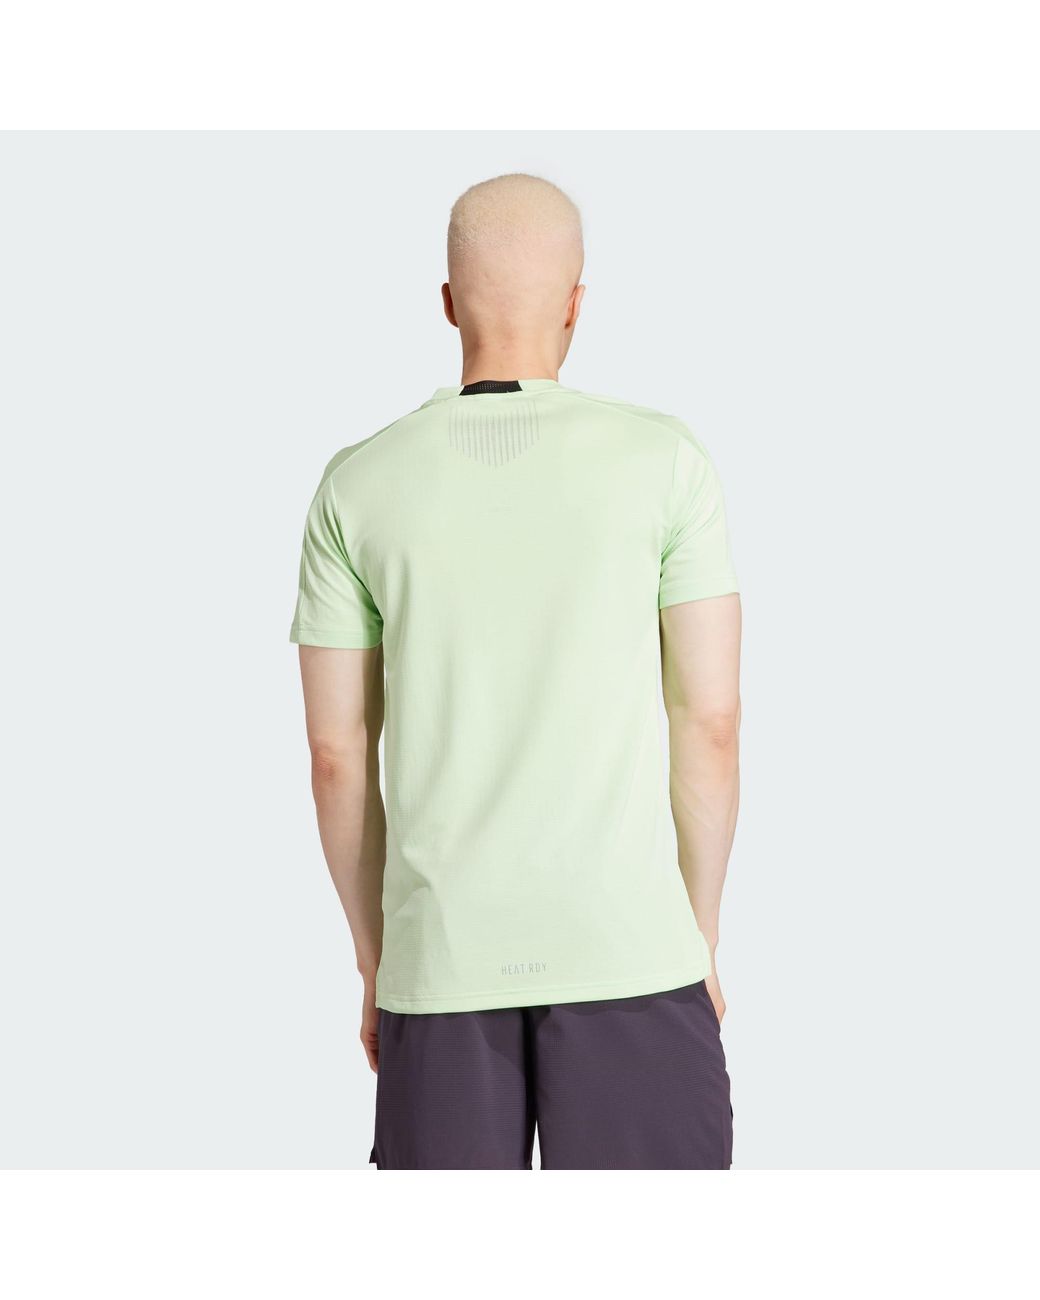 adidas Designed For Training Hiit Workout Heat.rdy T-shirt in Green for Men